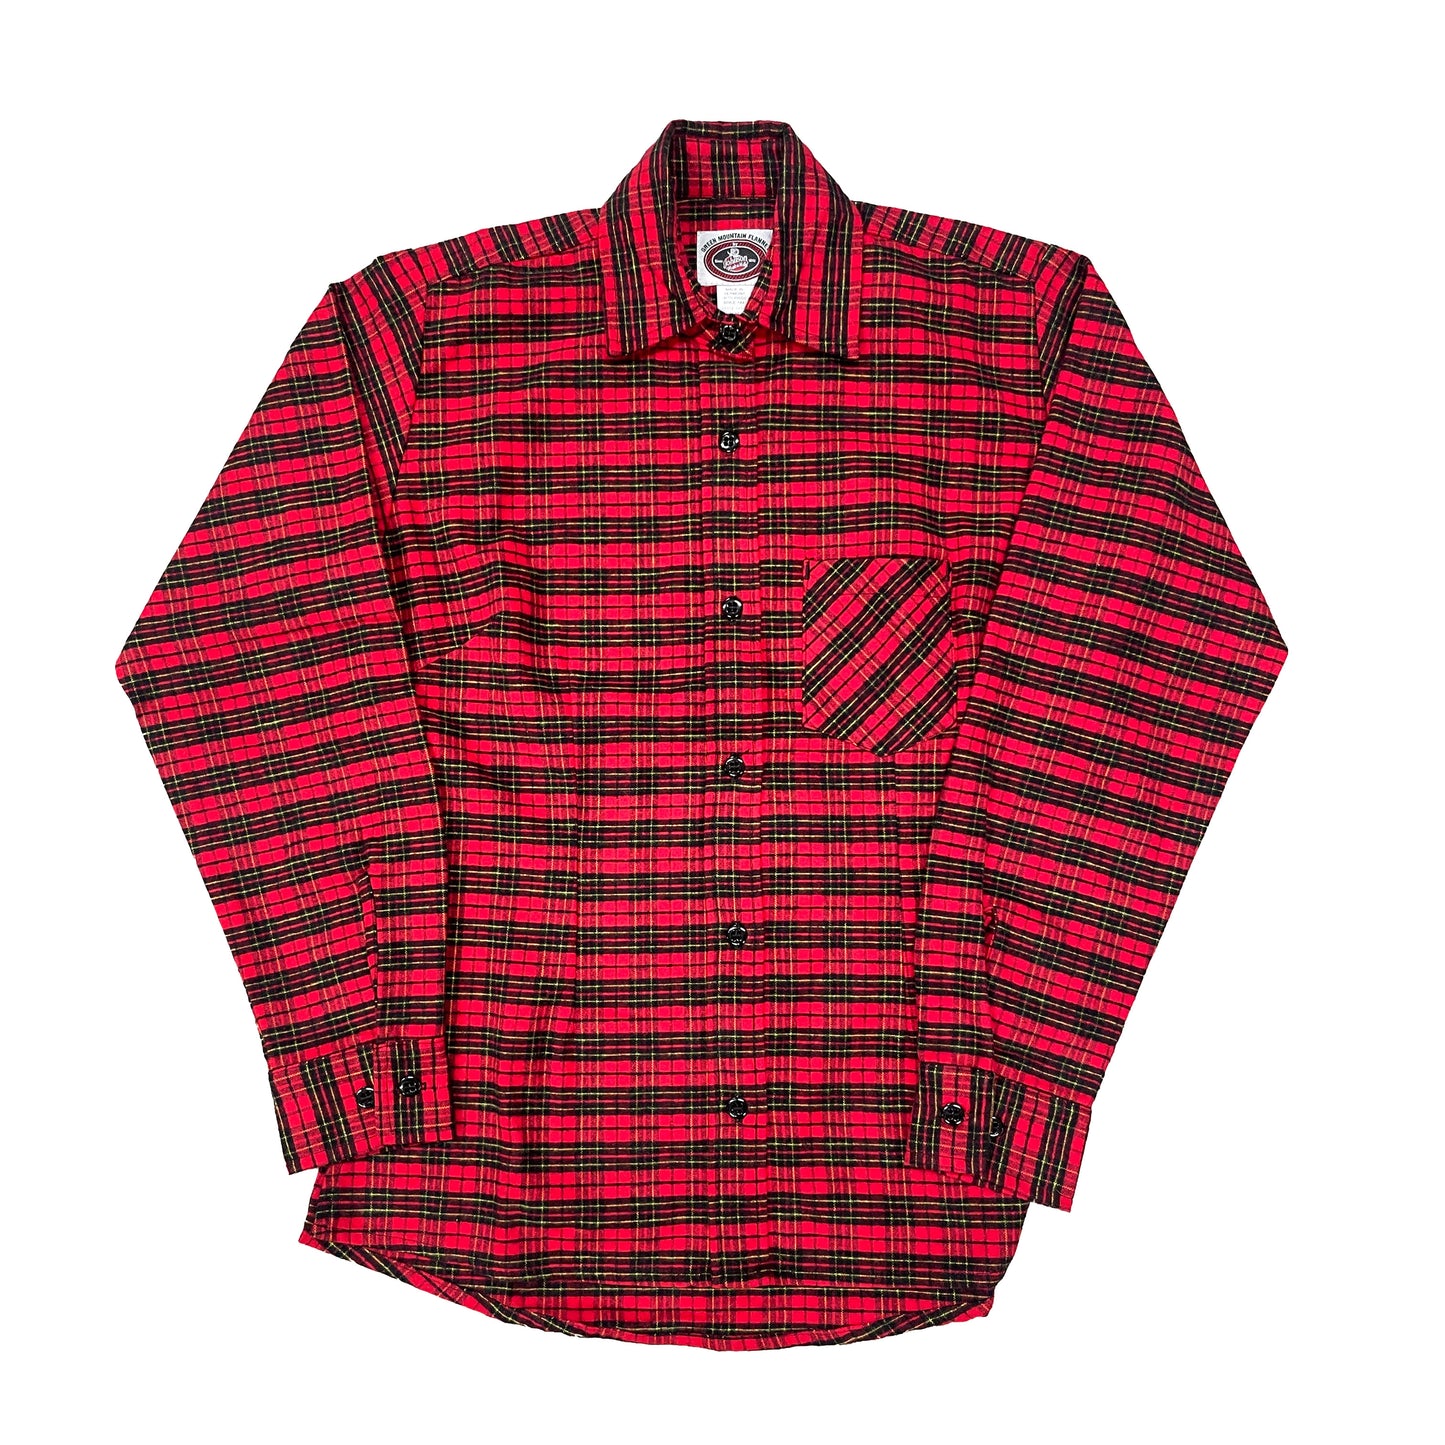 Green Mountain Flannel women's long sleeve button down shirt with 1 chest pocket, long tail and button cuffs. Shown in red, tartan.